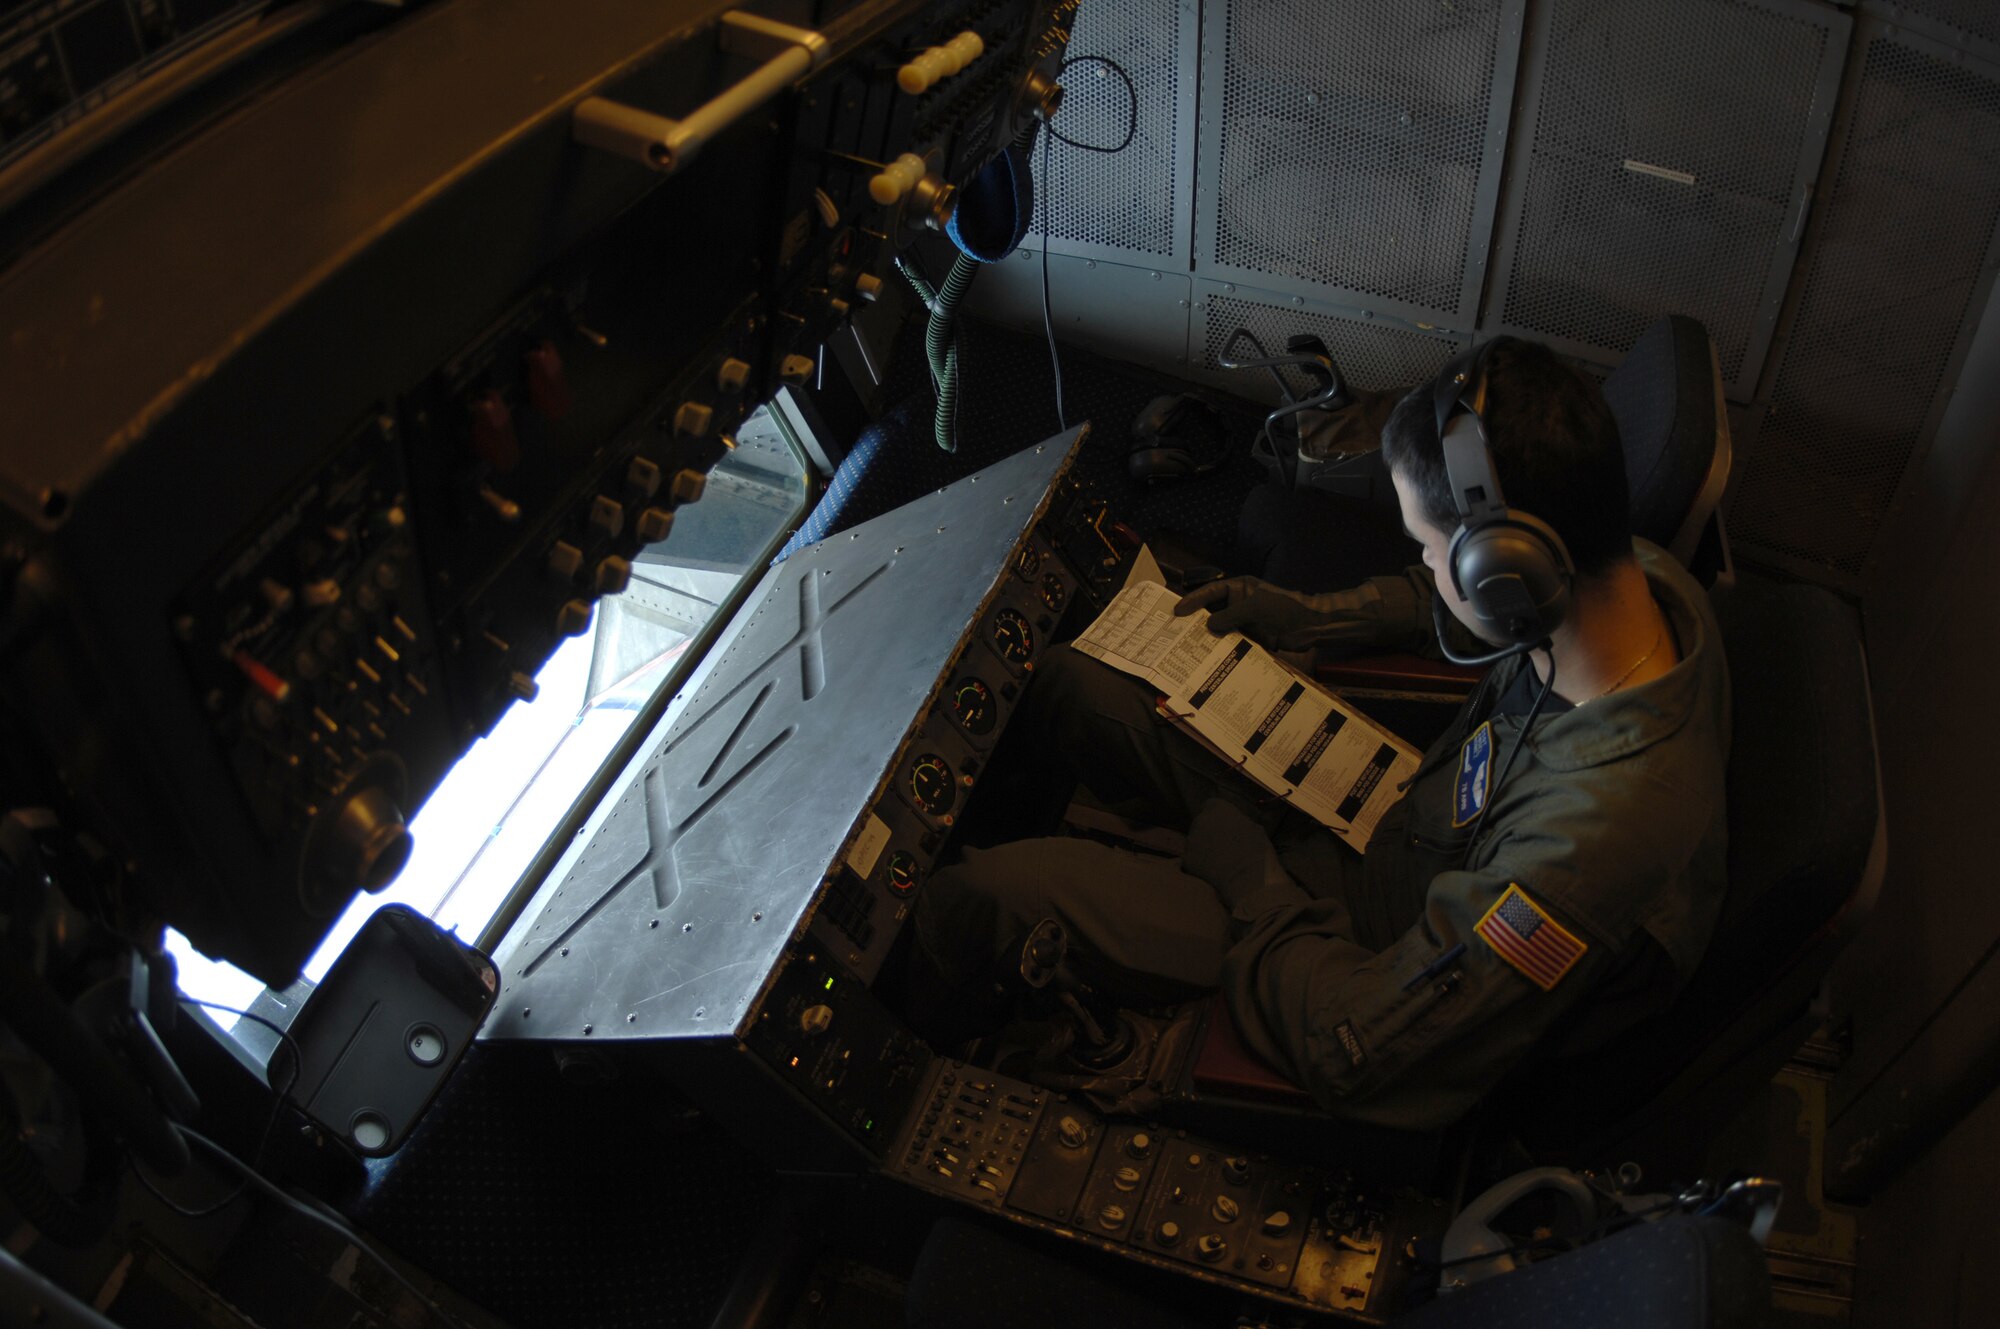 EIELSON AIR FORCE BASE, Alaska -- Staff Sgt Angel Gomez, KC-10 Boom Operator, 78th Air Refueling Squadron, McGuire Air Force Base, New Jersey checks his flight plan during a refueling mission here on 18 April in support of Red Flag-Alaska 07-1. Red Flag-Alaska is a Pacific Air Forces-directed field training exercise for U.S. forces flown under simulated air combat conditions. (U.S. Air Force photo by Staff Sgt. Joshua Strang)